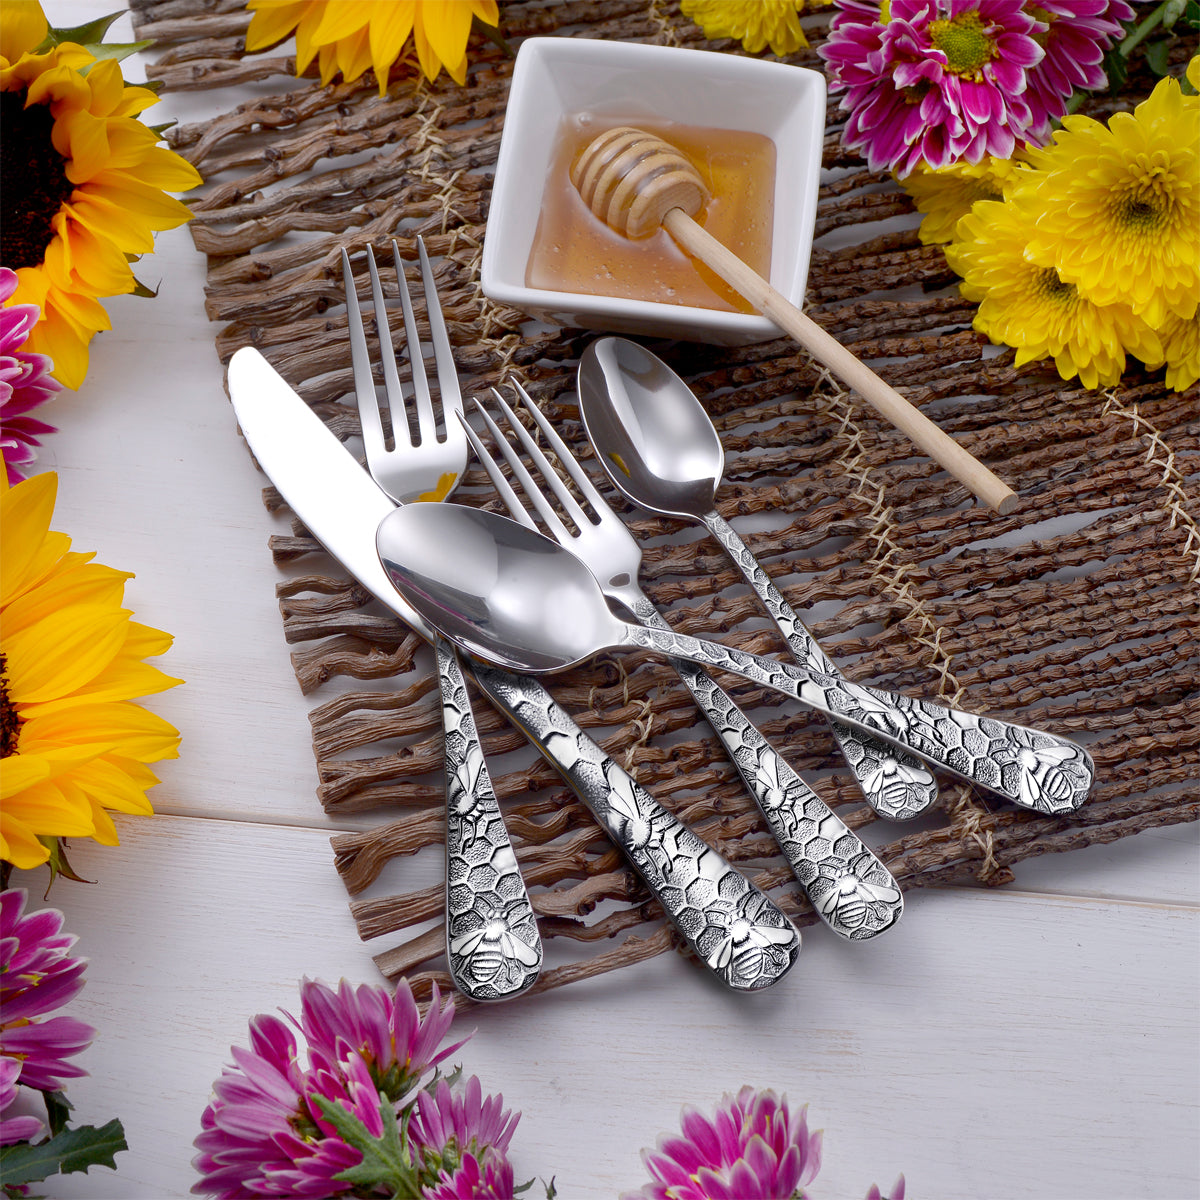 Flatware that Gives Back